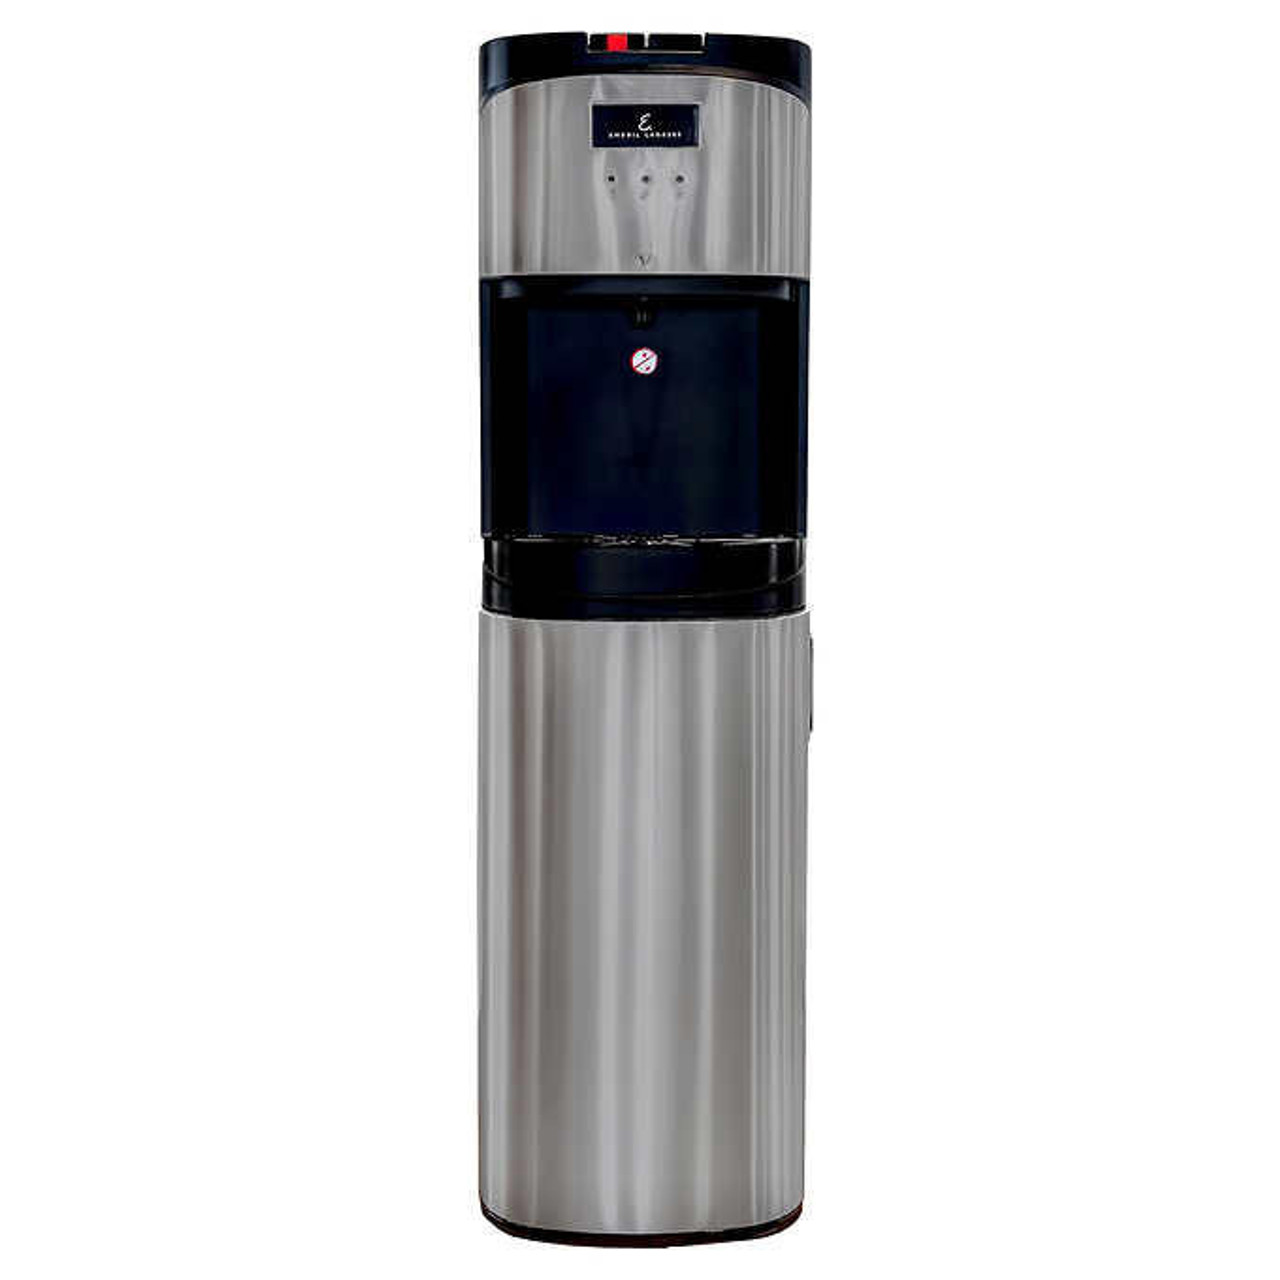  Emeril Lagasse Premier Hot and Water Cooler with Built-In BRITA Filter 